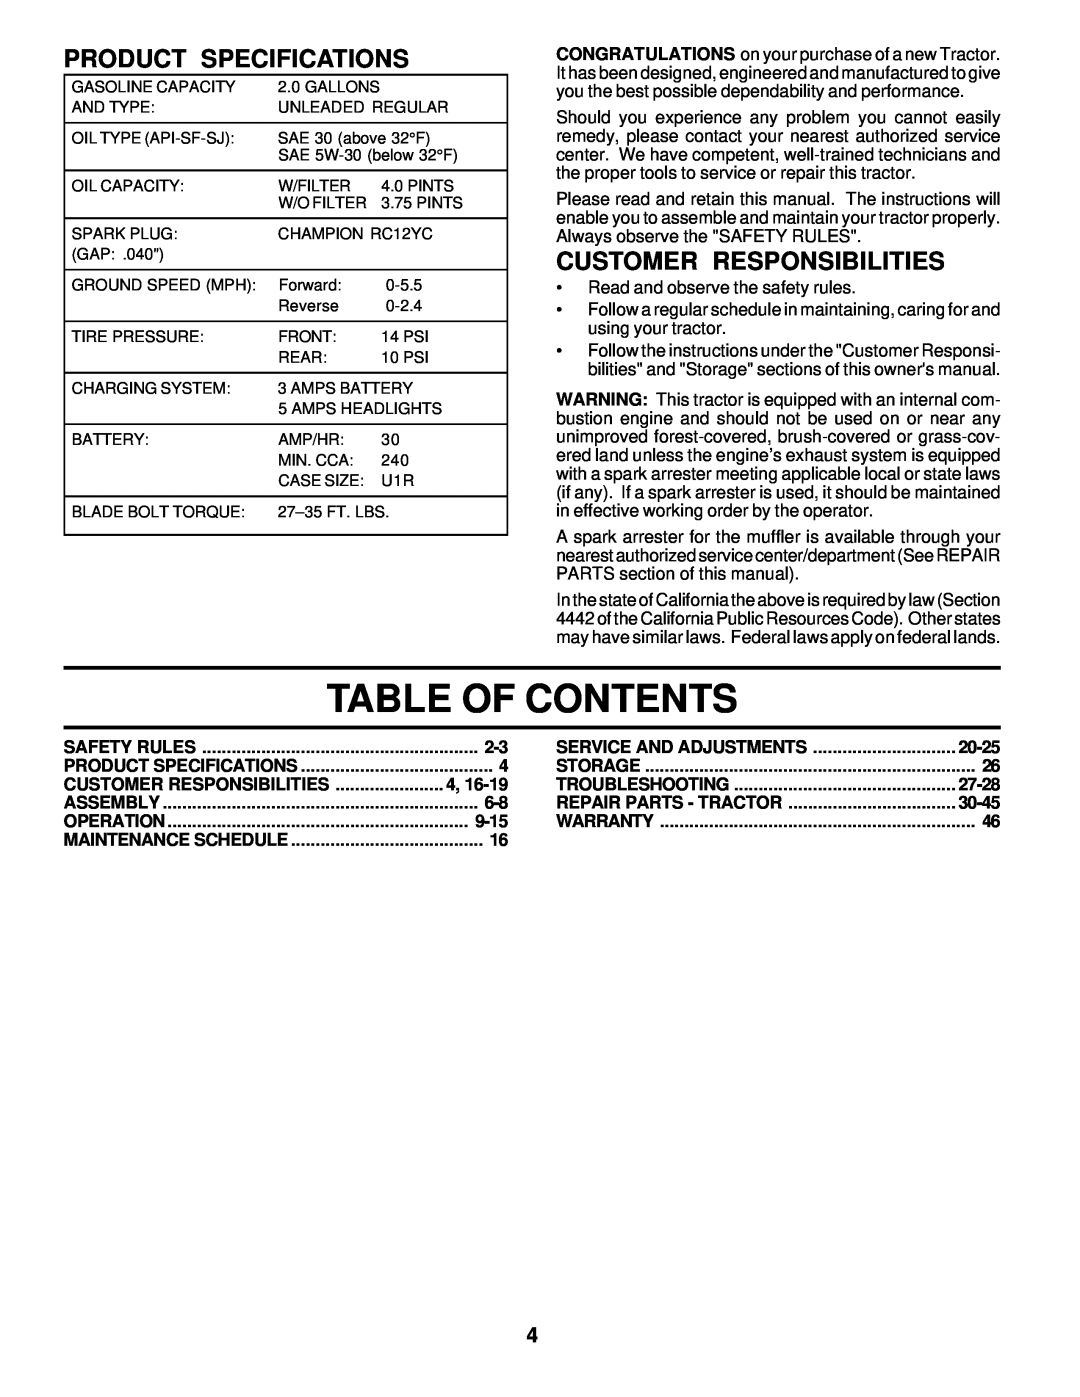 Poulan 178087 owner manual Table Of Contents, Product Specifications, Customer Responsibilities 